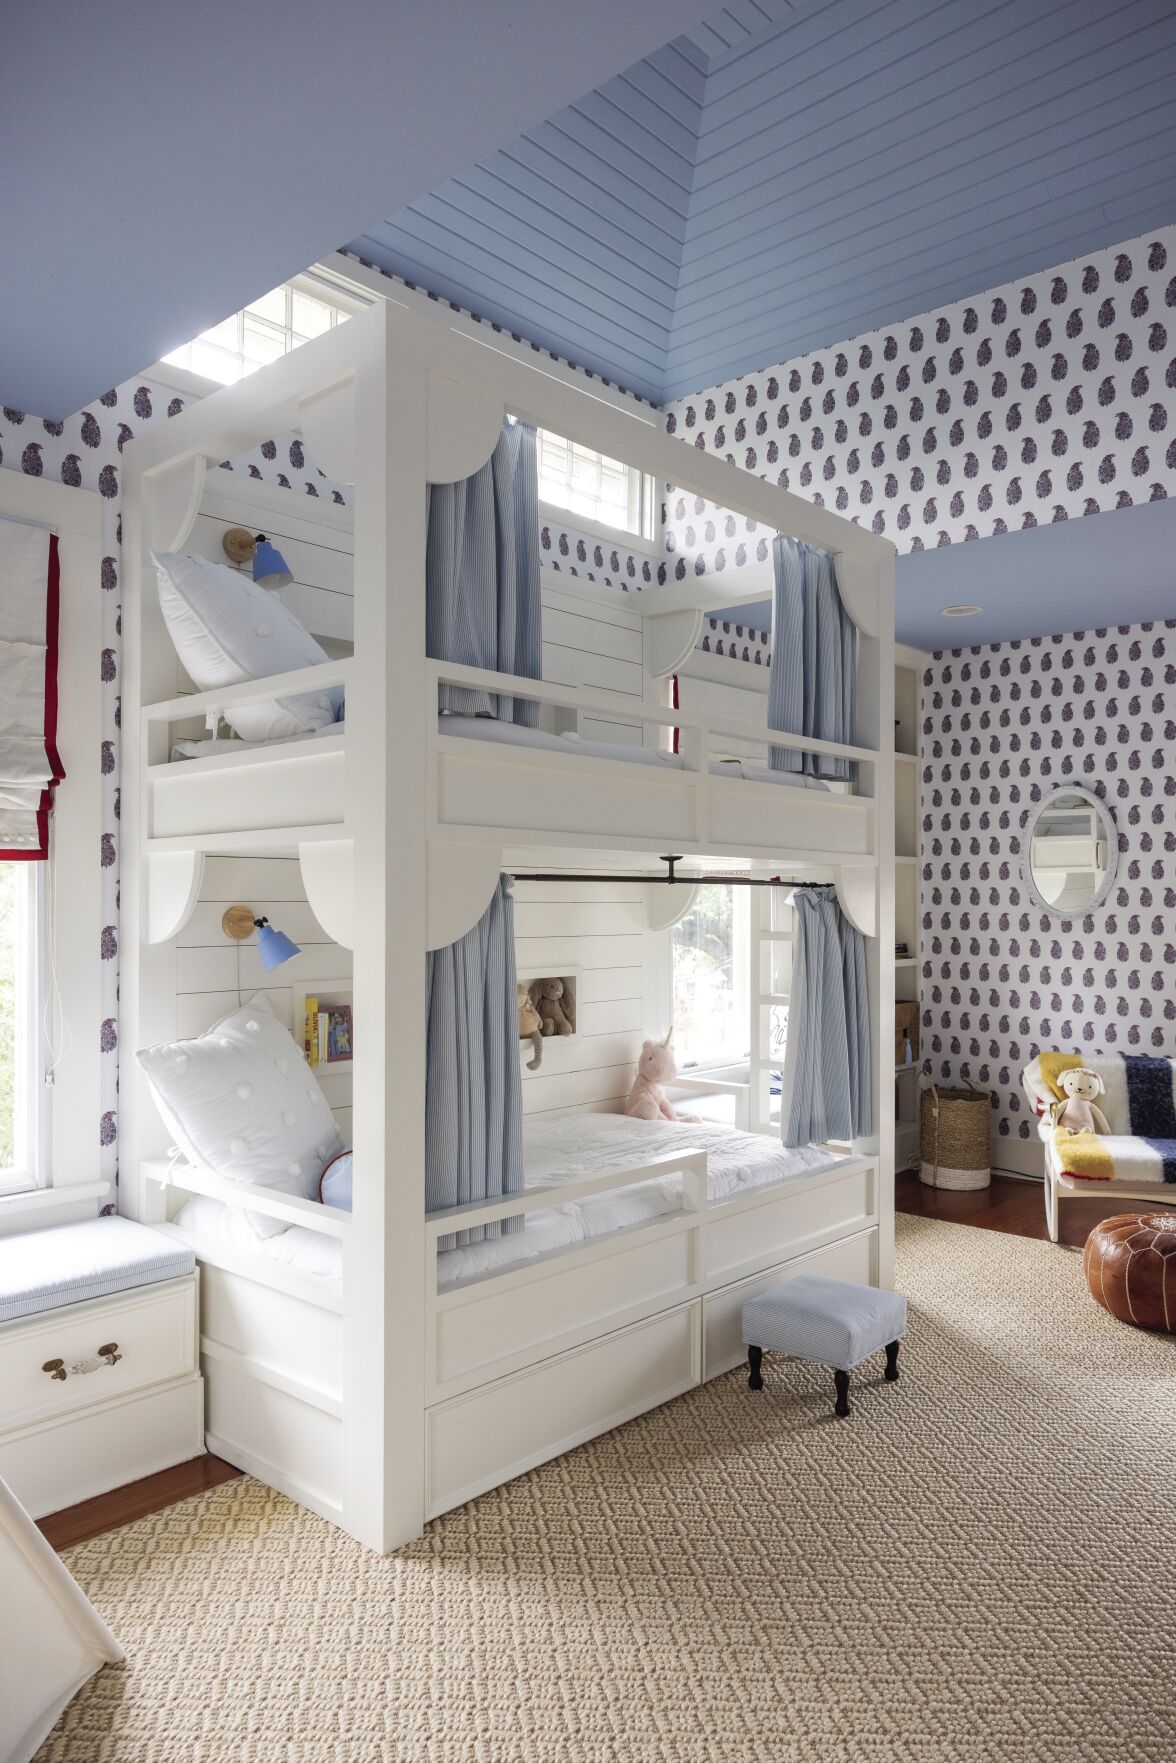 Vaulted Ceilings And Custom Bunk Beds, Serena And Lily Bunk Beds